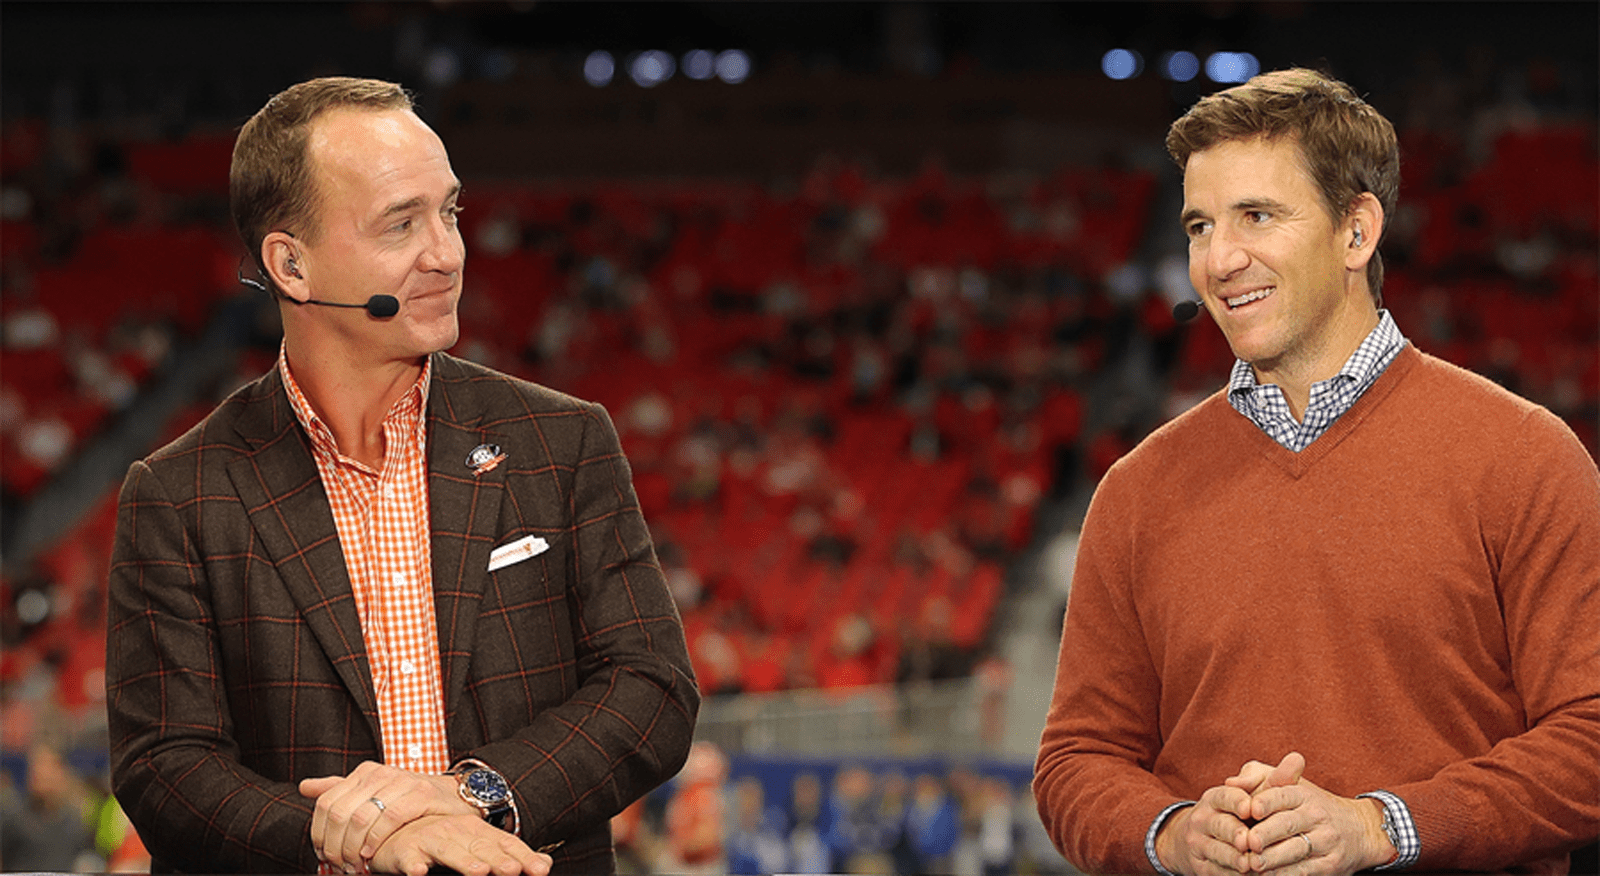 Peyton And Eli Manning Unveil 'Manningcast' Schedule With Video